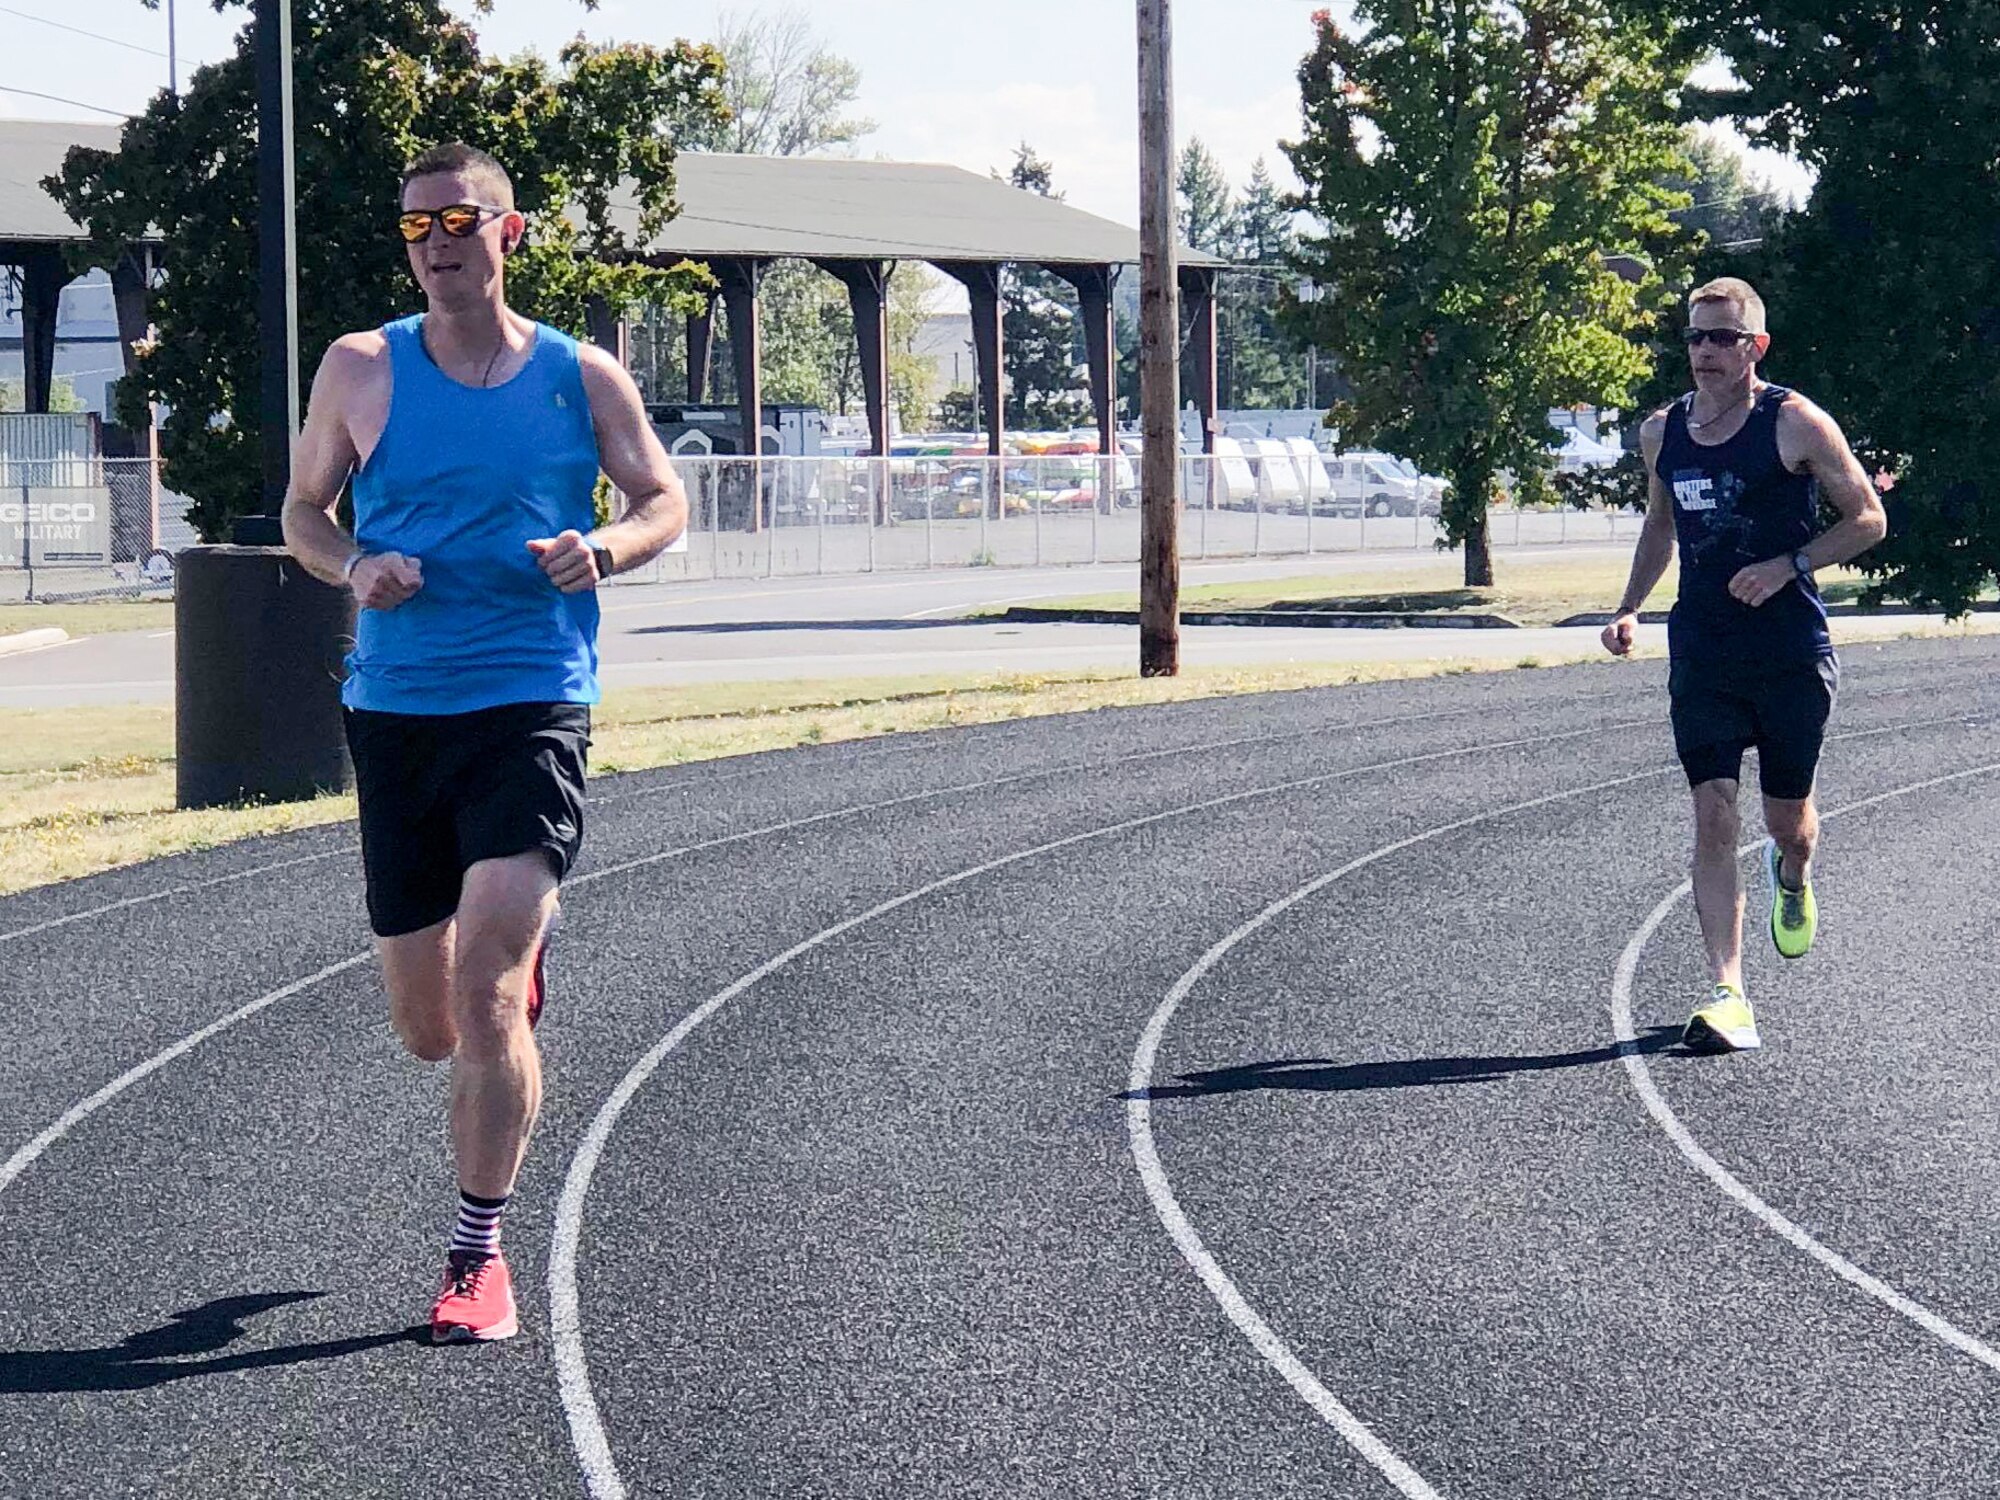 1st Lt. Krosby Keller, left, 225th Air Defense Squadron air battle manager, runs with Bruce Robie, right, 225th Support Squadron National Airspace System Defense program manager, during the Joint Base Lewis-McChord 24-Hour POW/MIA Remembrance Run Sept. 18, 2018.  Keller placed first in individual standings with 100 miles and Robie finished second in the individual standing with 74 miles.